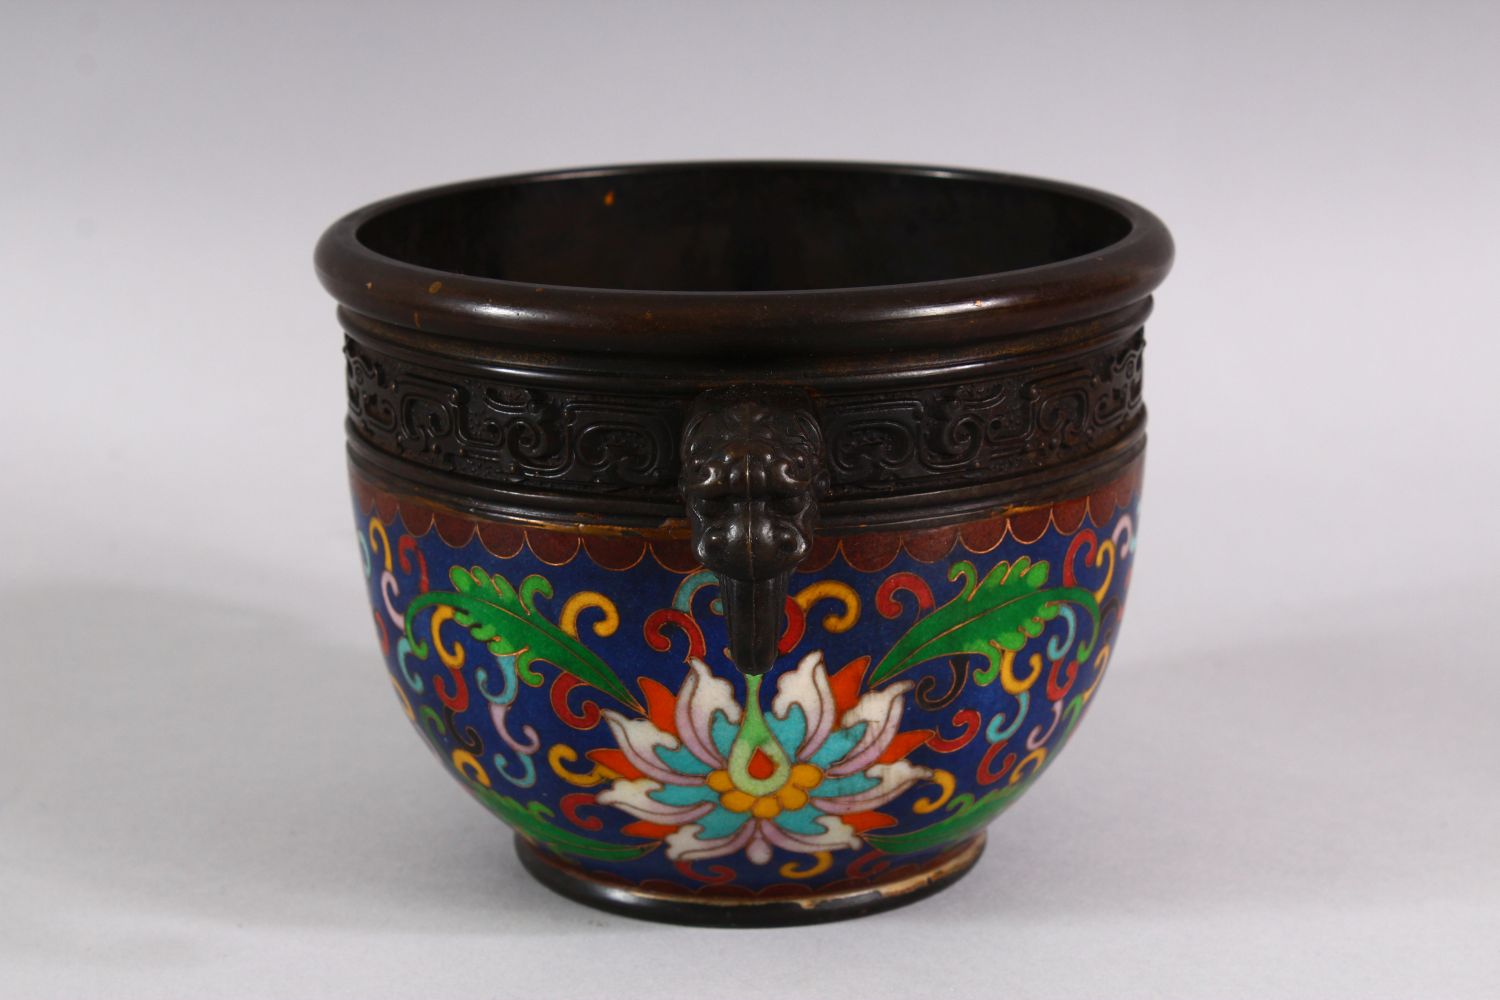 A CHINESE CLOISONNE TWIN HANDLE INCENSE BURNER - the body with a lower band of cloisonne enamel - Image 2 of 7